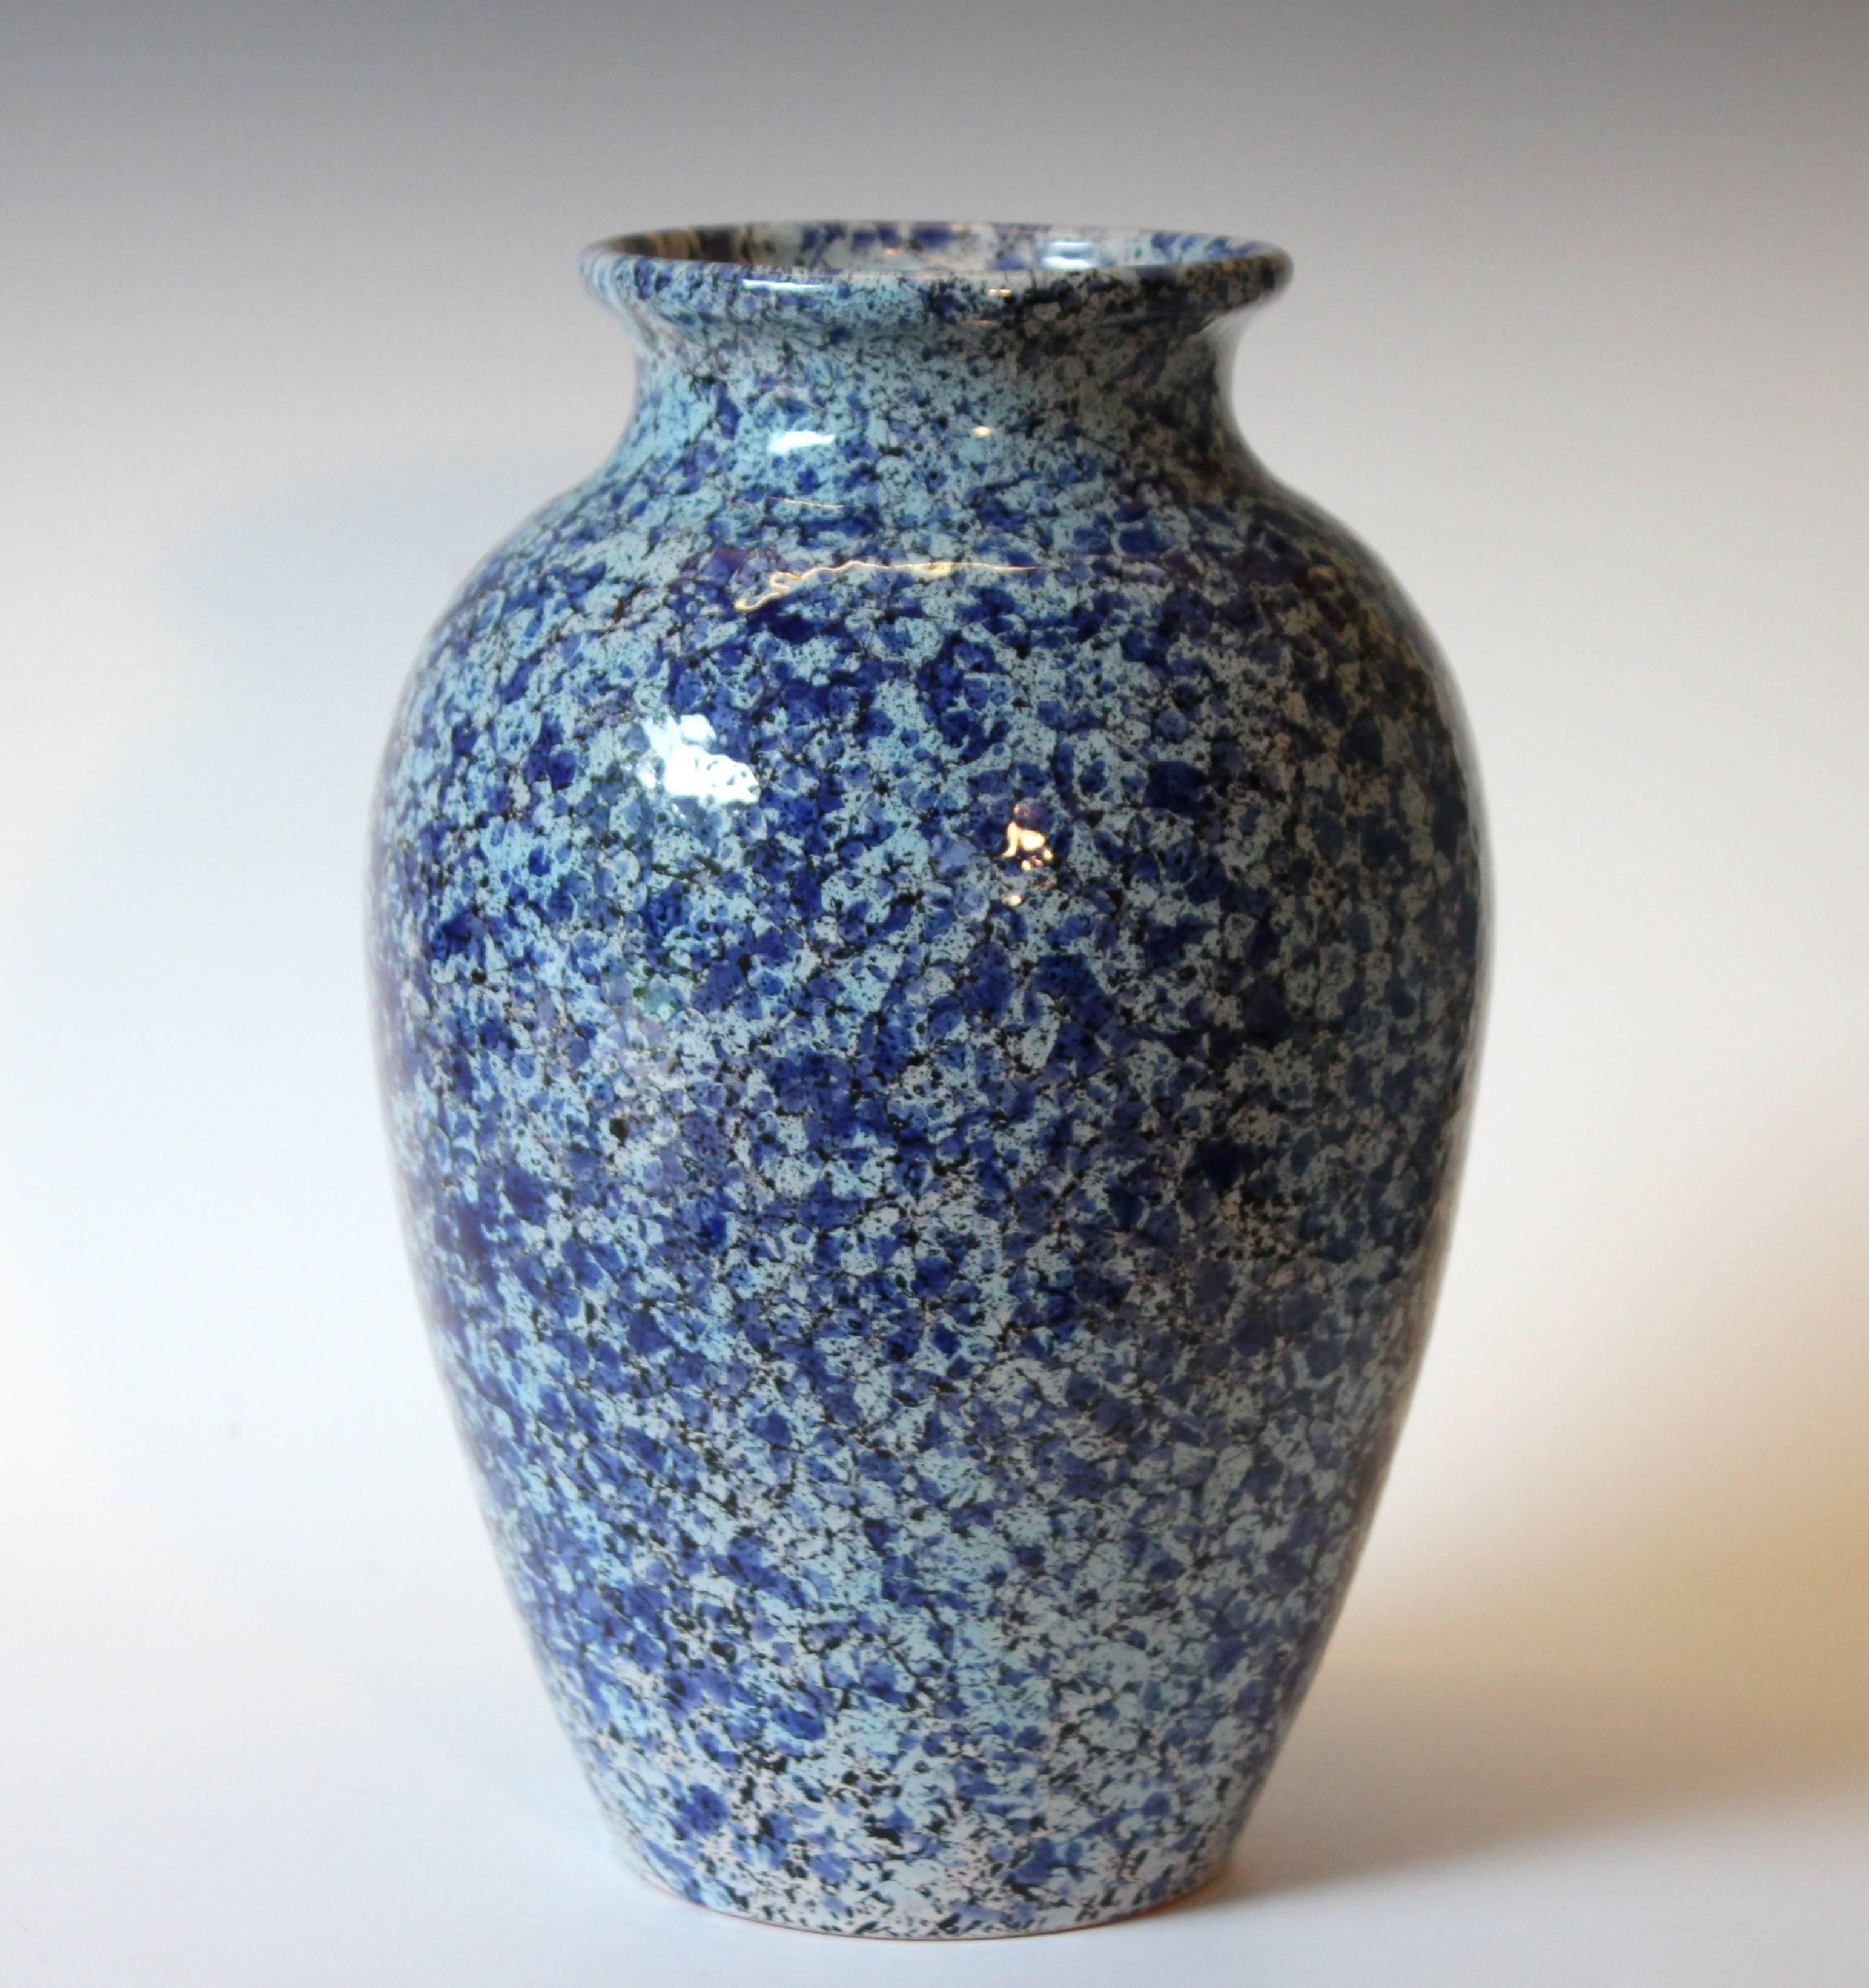 Big hand-turned Italian pottery vase in classical form with mottled blue and white glaze. Circa 1960s. Attributed to Italica Ars. With illegible paper label on base. 12